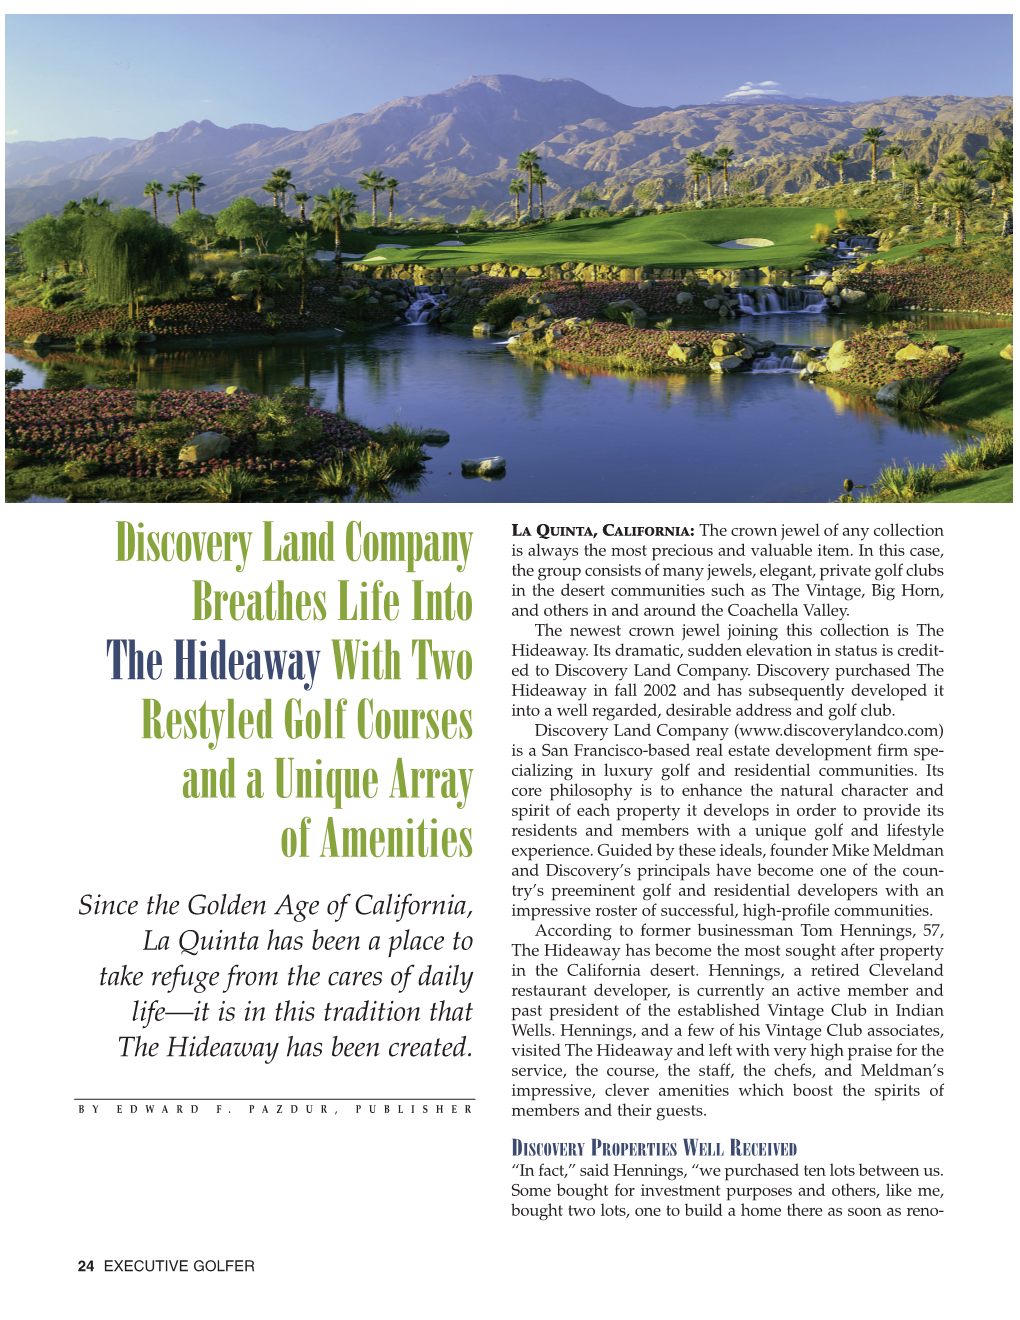 Discovery Land Co Breathes Life Into the Hideaway